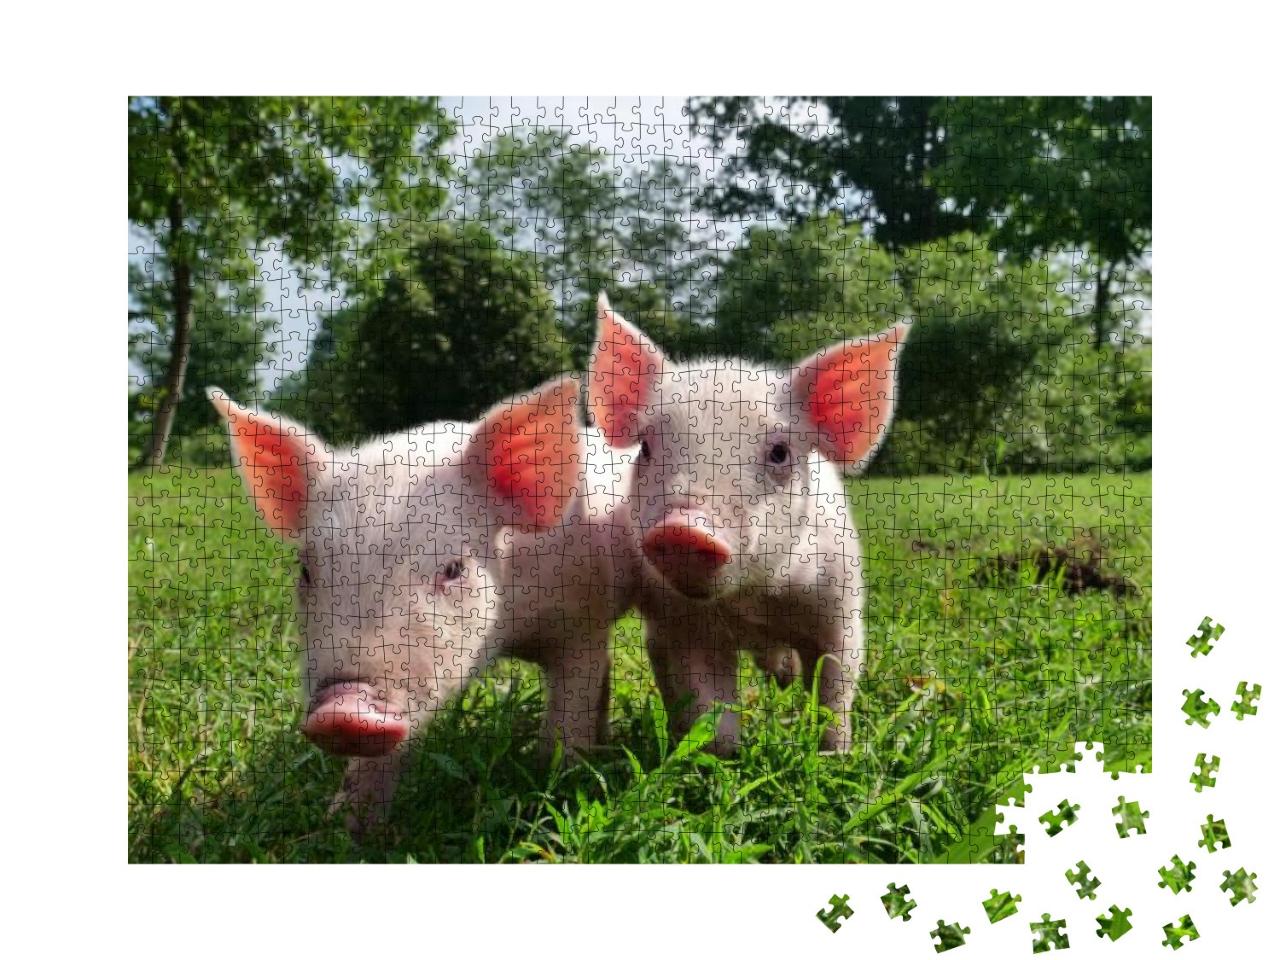 Pig Cute Newborn Standing on a Grass Lawn. Concept of Bio... Jigsaw Puzzle with 1000 pieces